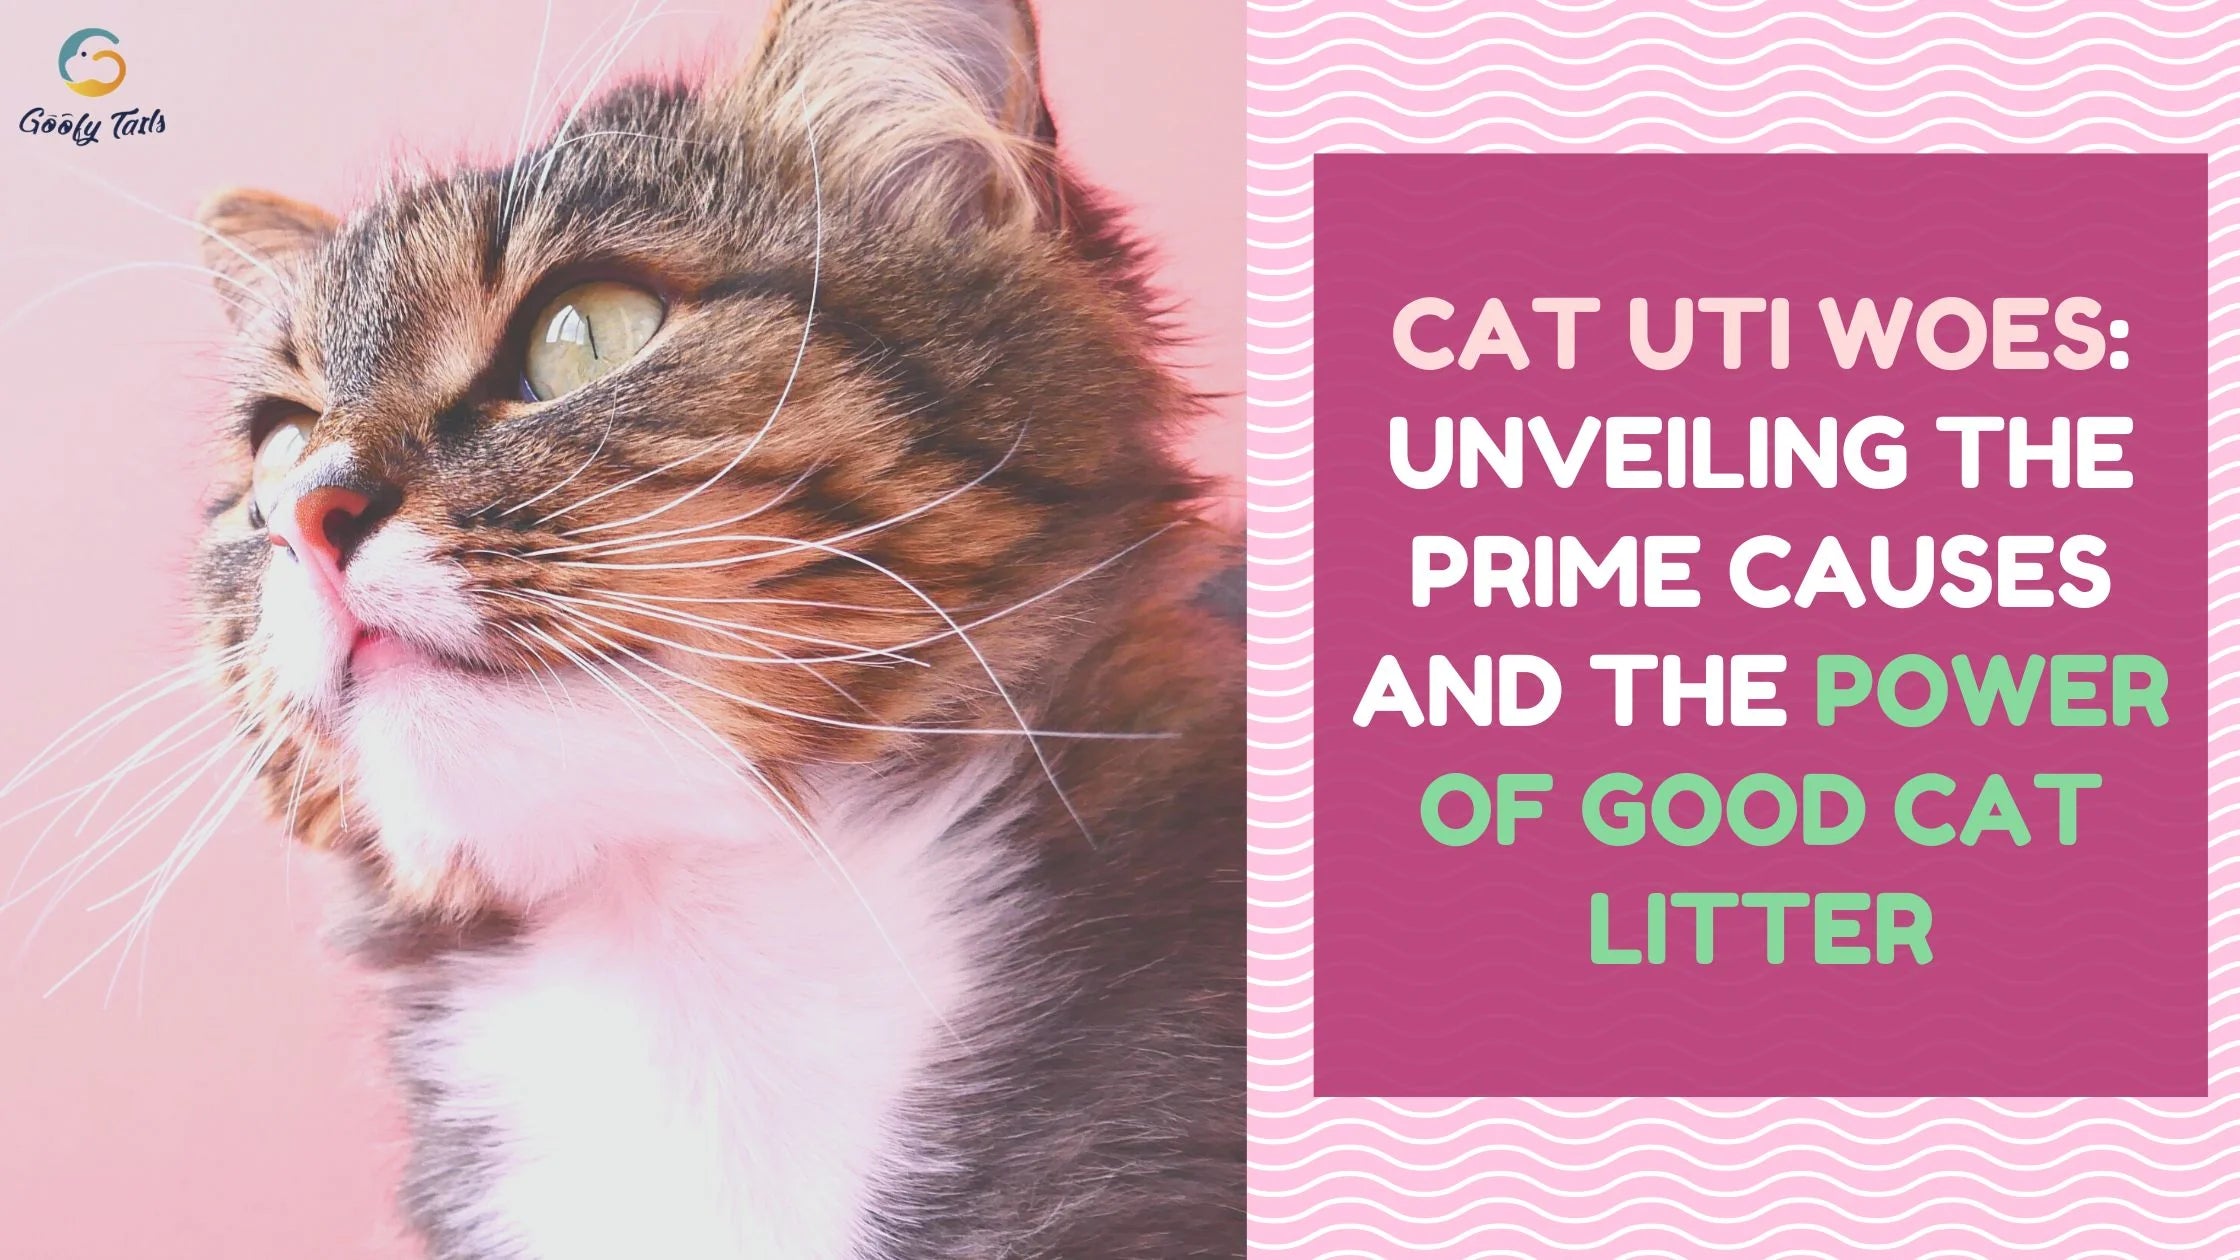 Cat UTI Woes: Unveiling the Prime Causes and the Power of Good Cat Litter